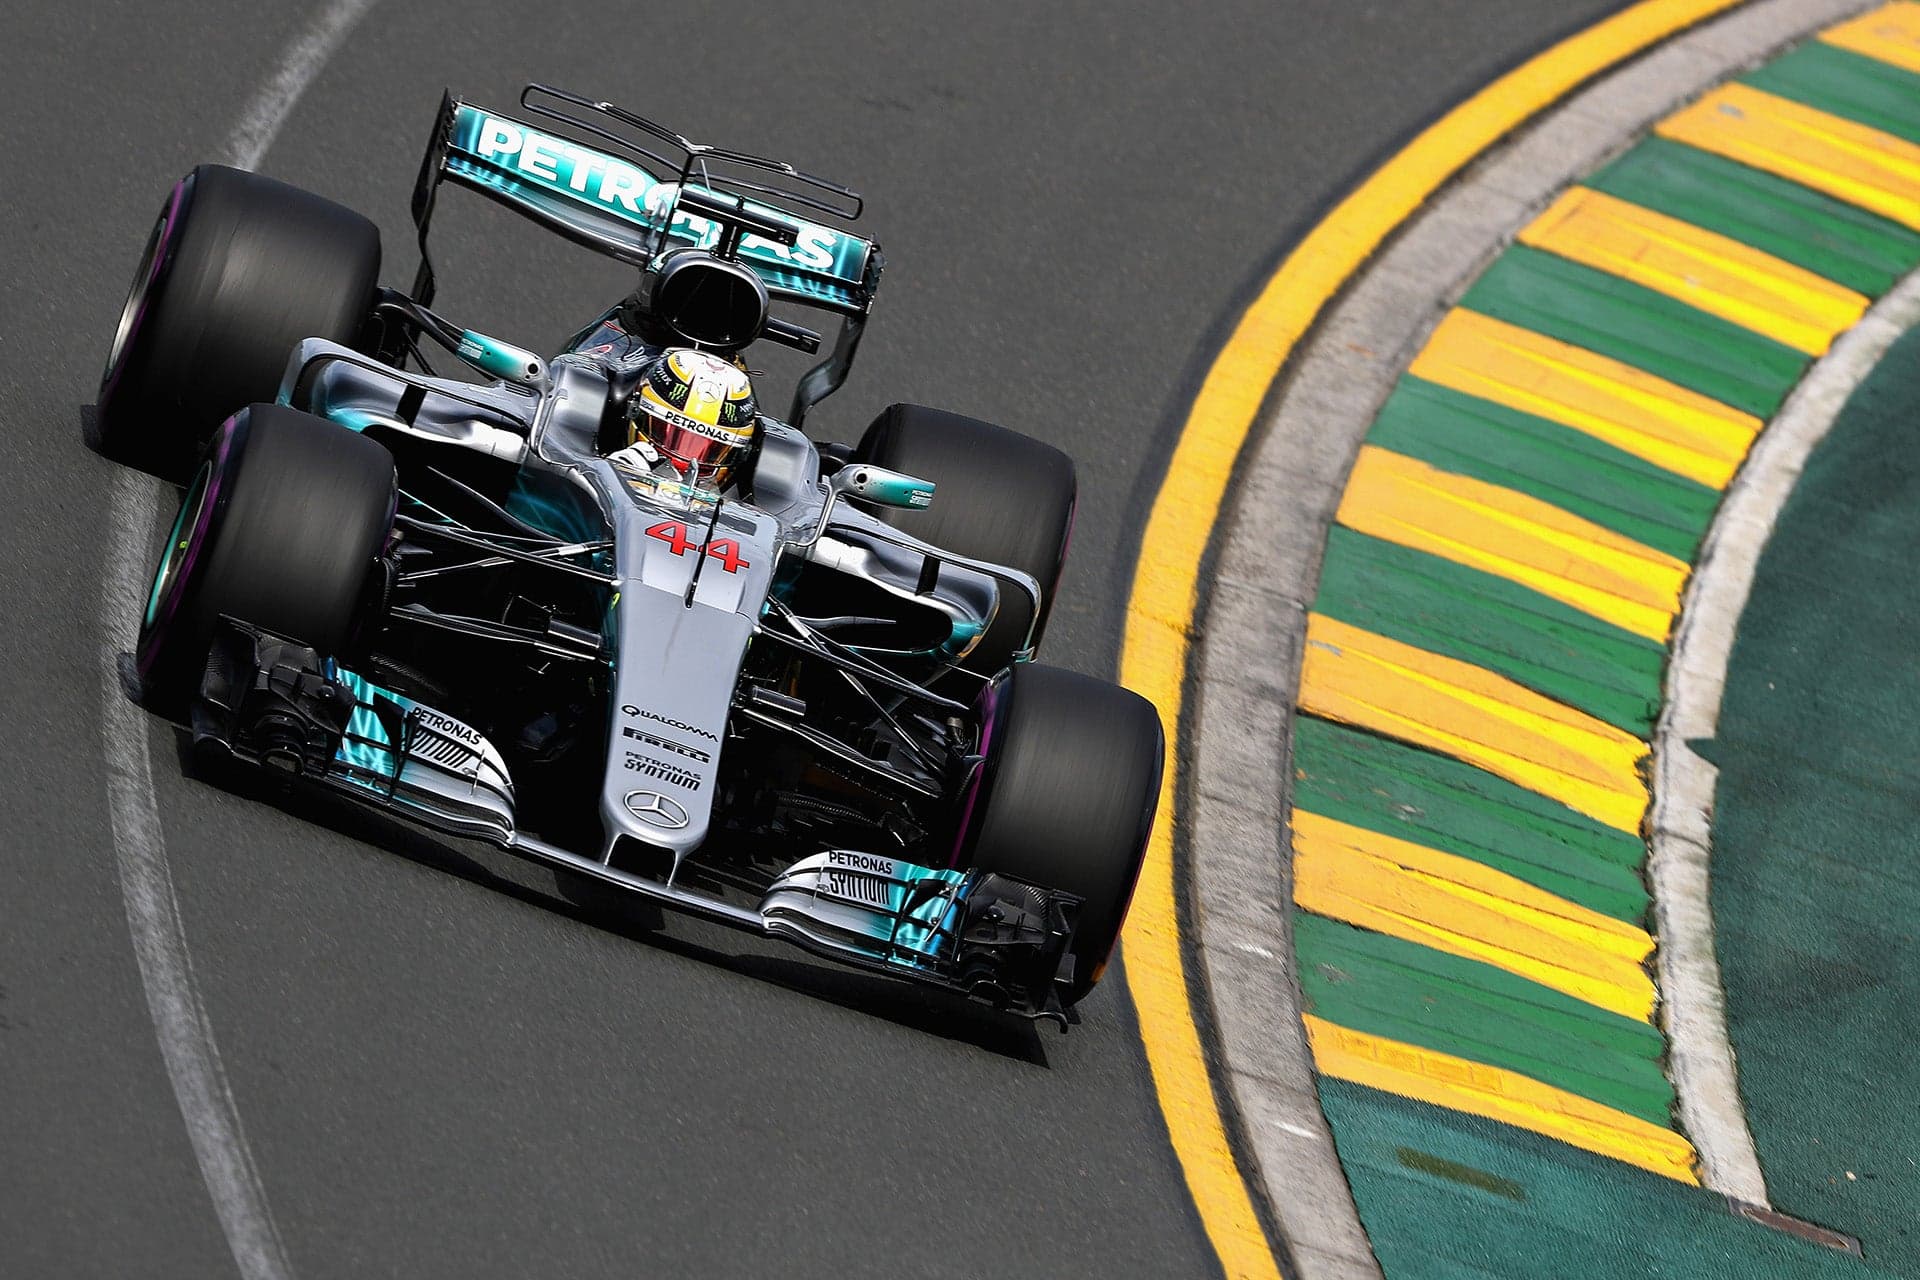 Lewis Hamilton Tops First Practice Sessions For 2017 Australian Grand Prix